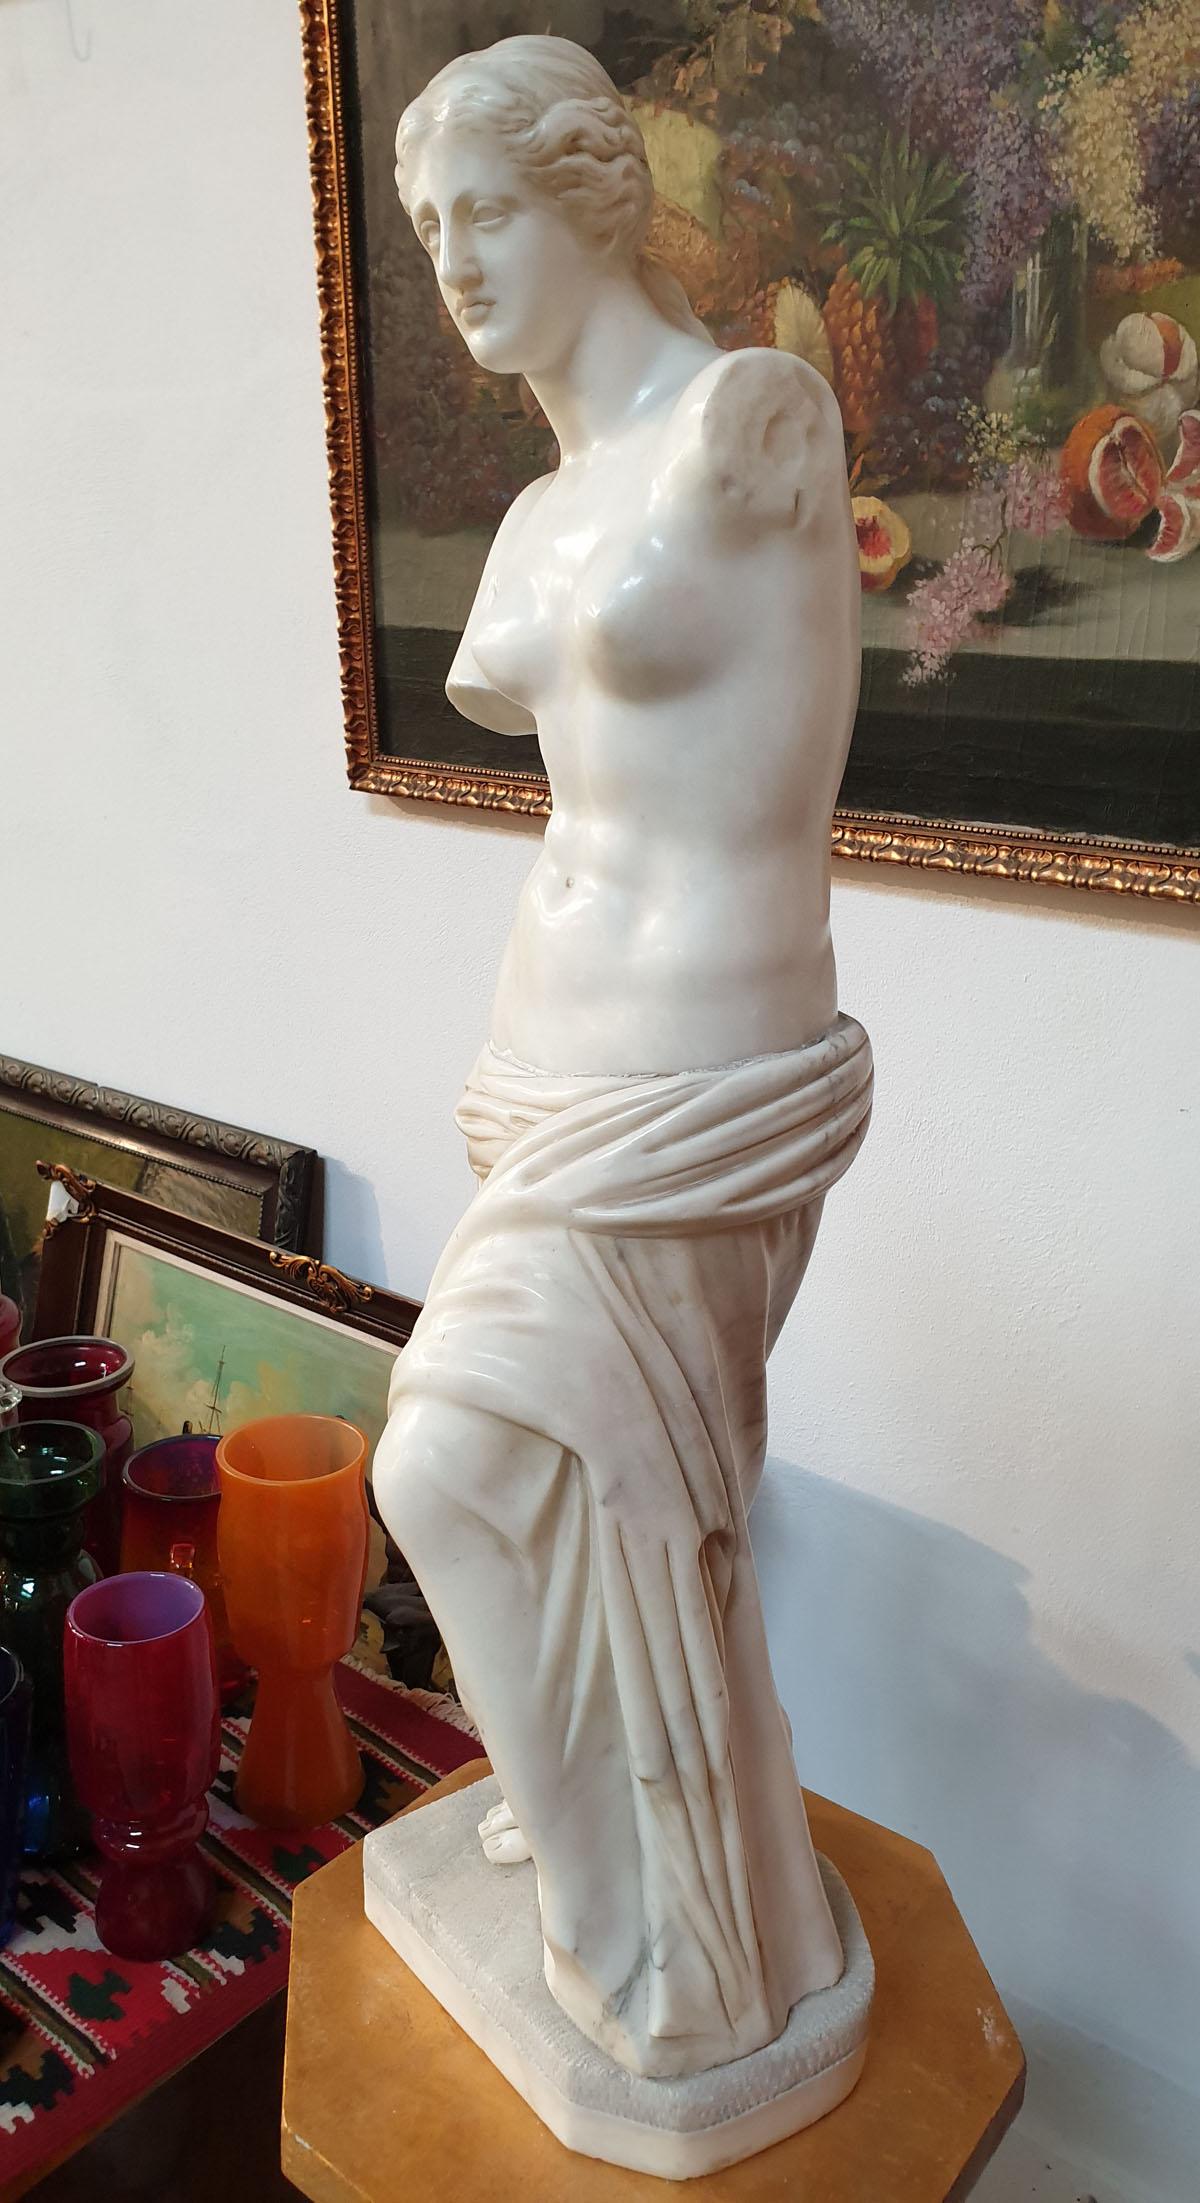 Sculpture “The Venus Of Milo”, marble
Almost a meter high, marble, unsigned sculpture,
depicting Aphrodite of Melos, commonly known as 